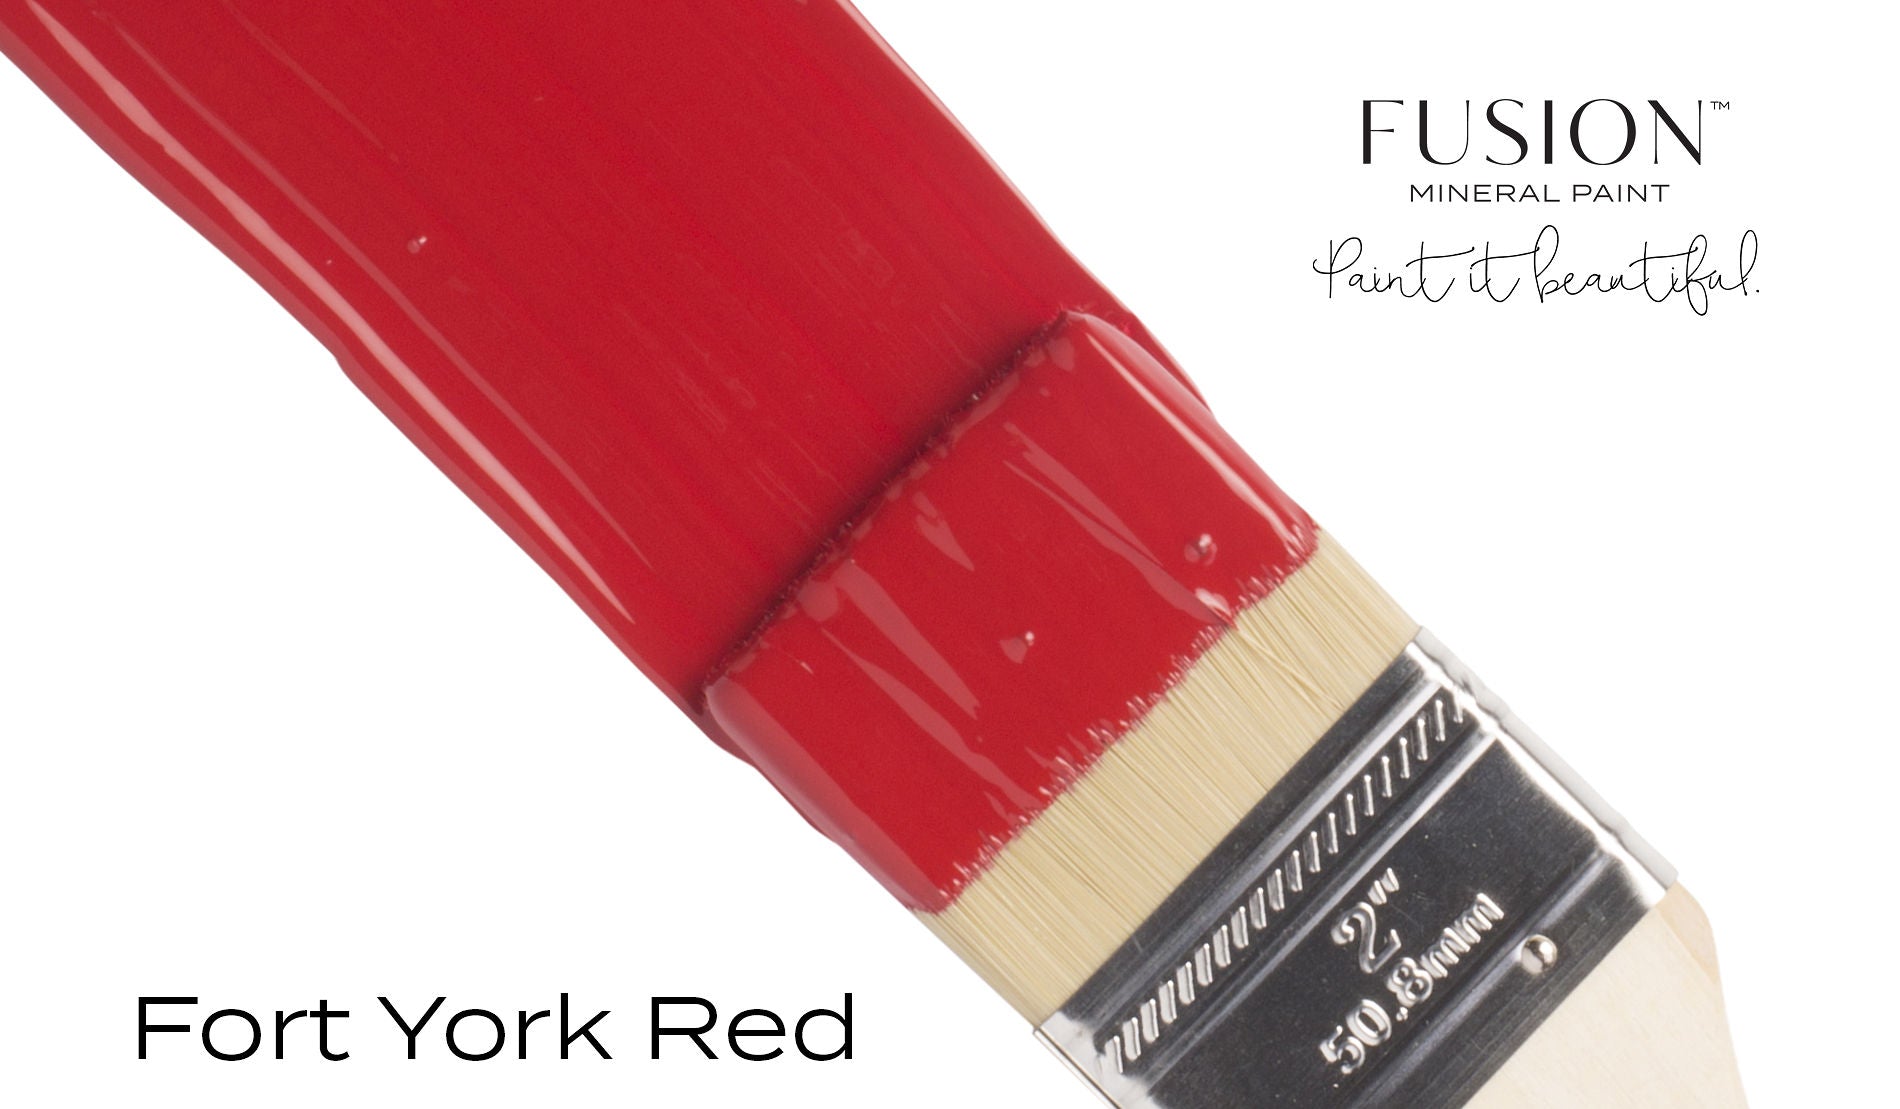 Fusion Mineral Paint Fort York Red brush